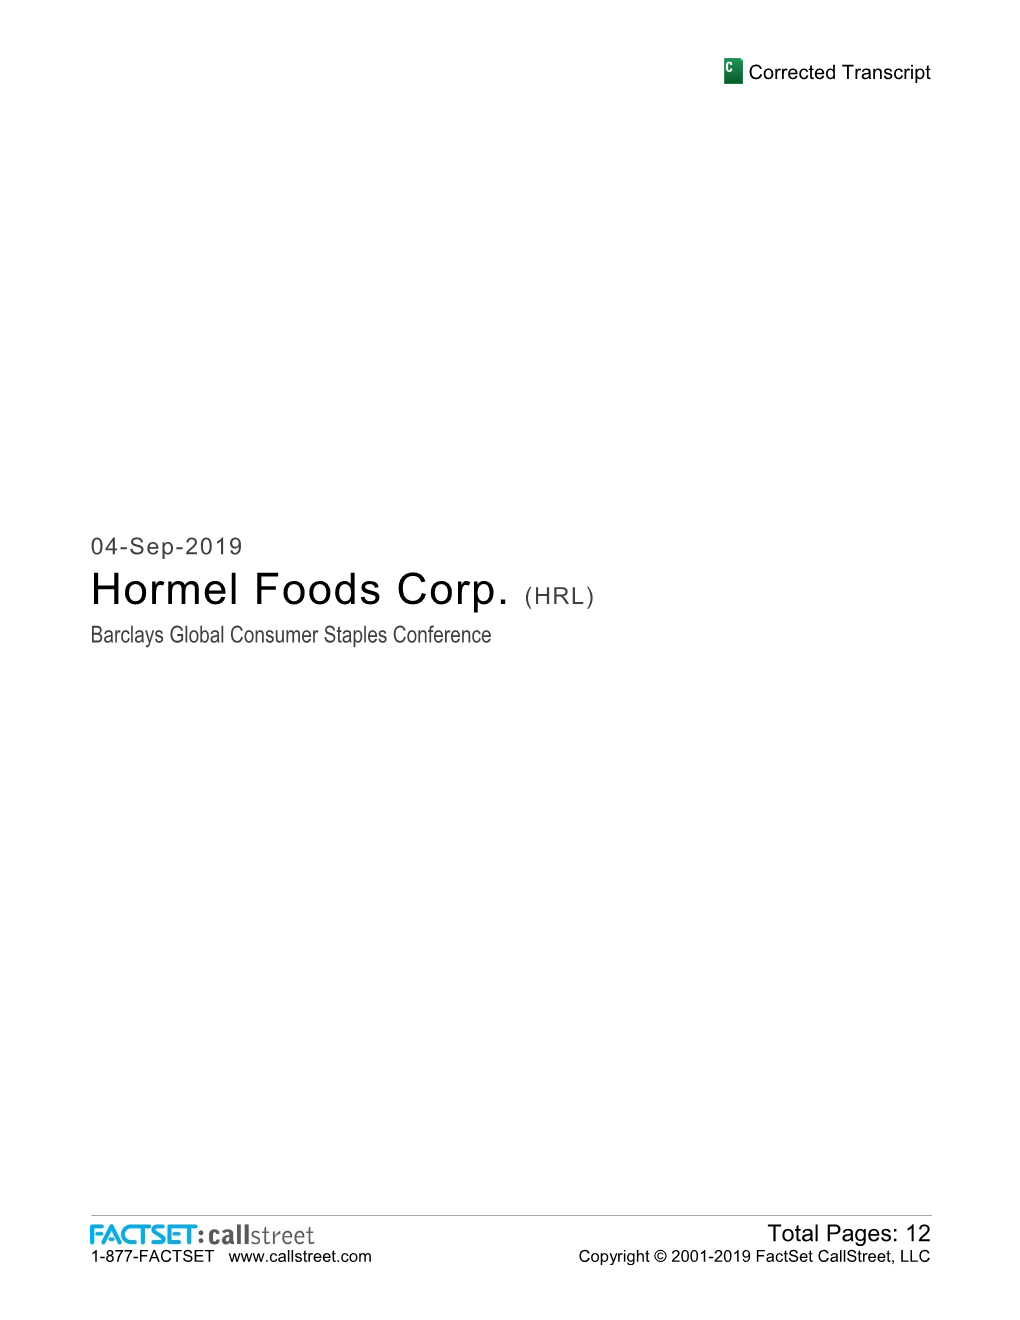 Hormel Foods Corp. (HRL) Barclays Global Consumer Staples Conference